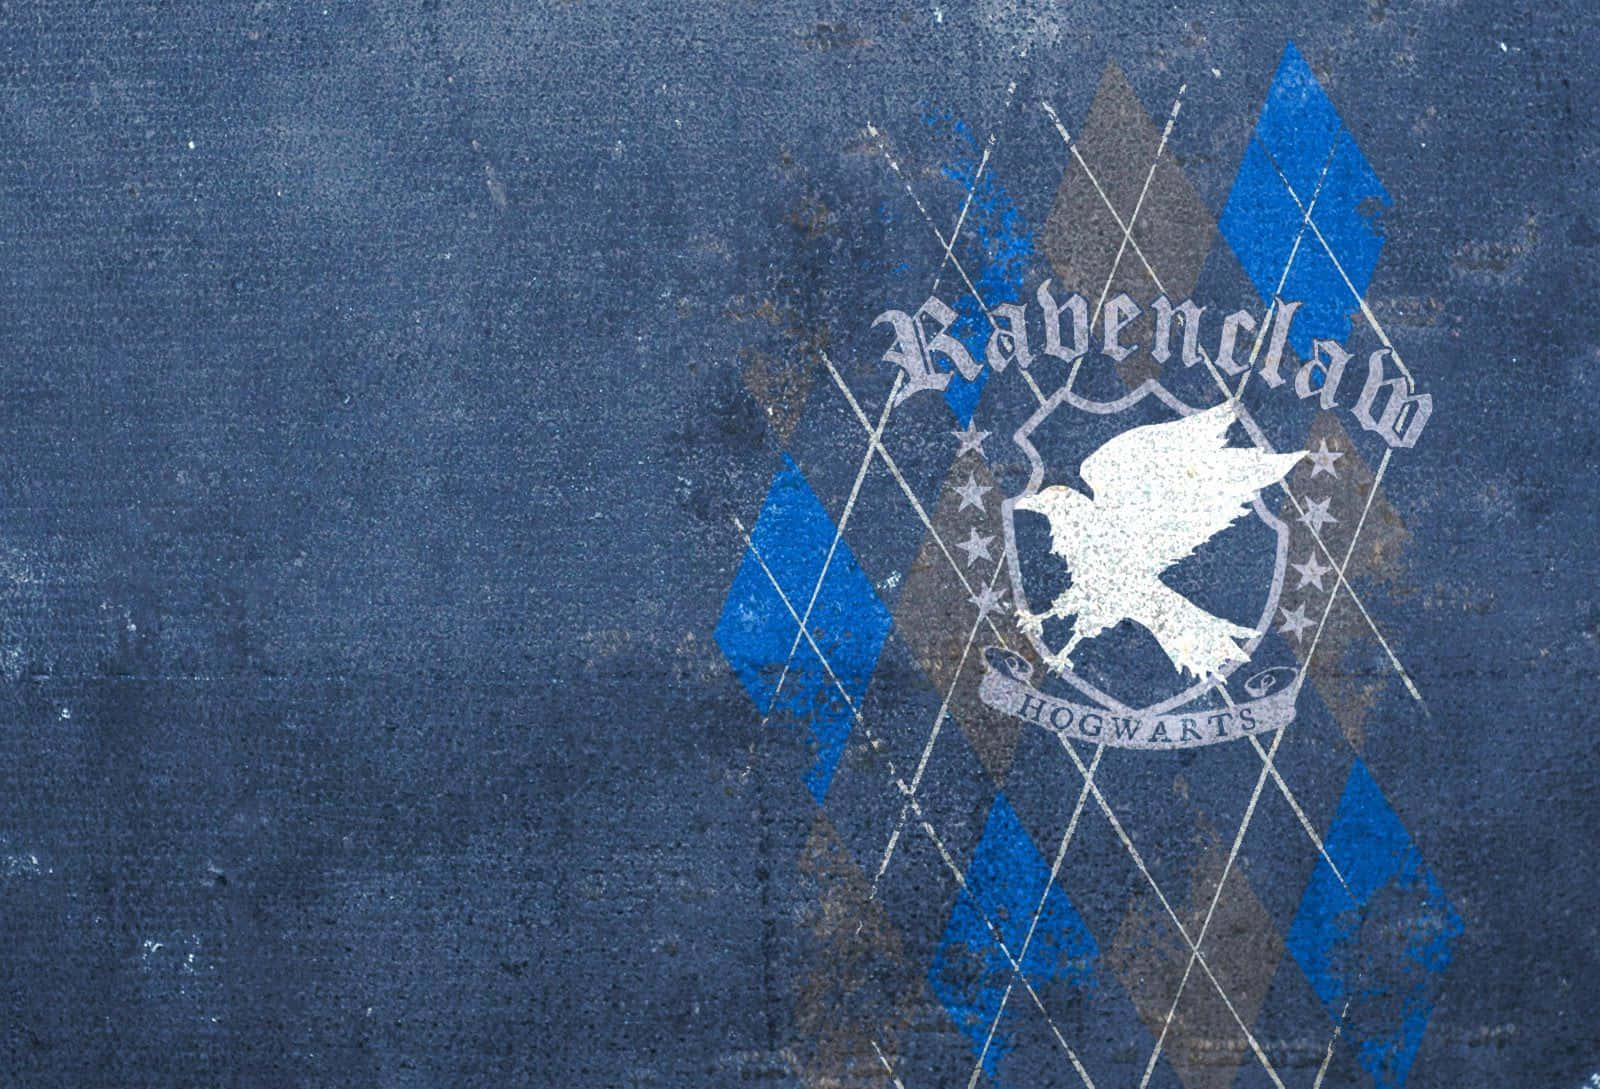 Join the Ravenclaw House and show off your wit and learning! Wallpaper